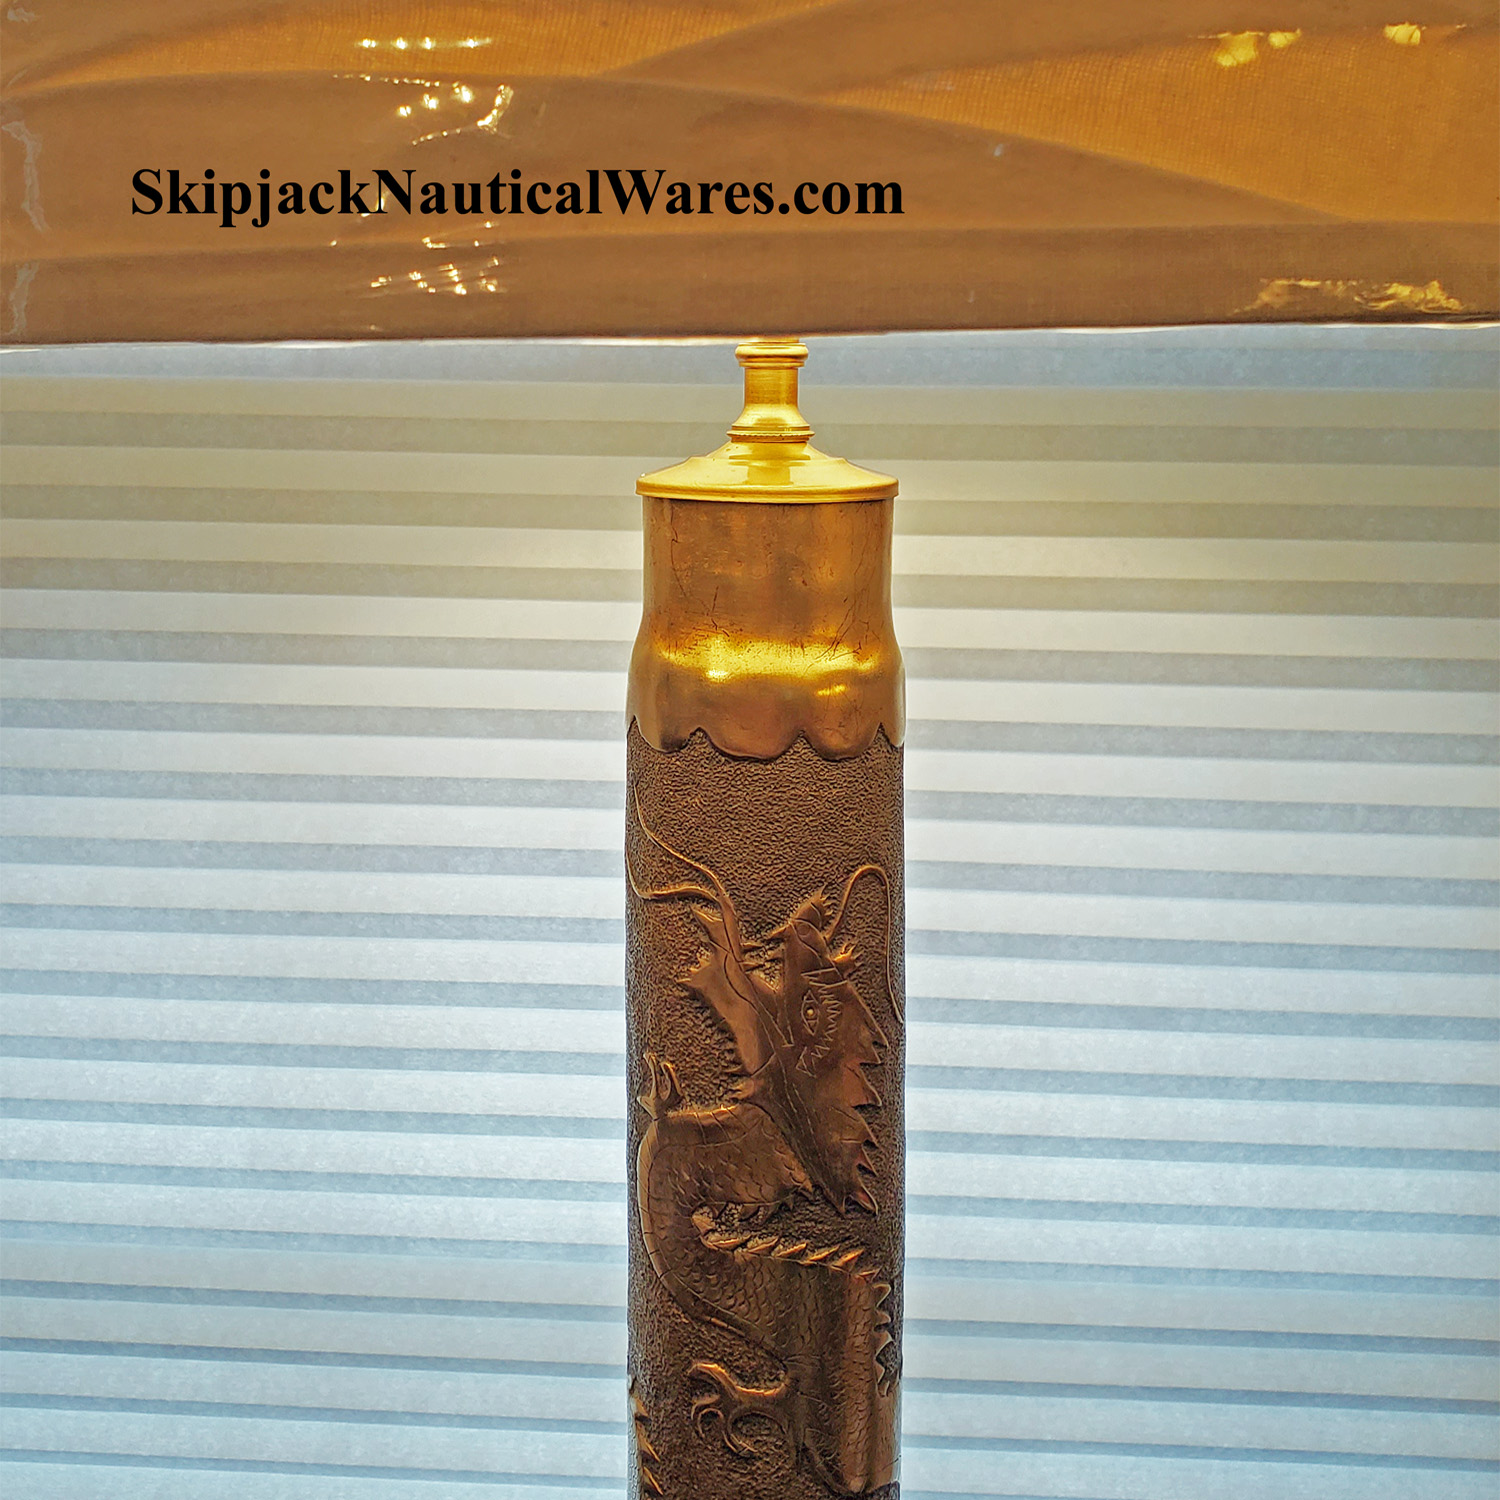 Exceptional Trench Art Chinese Dragons on Brass Shell Casing: Skipjack  Nautical Wares